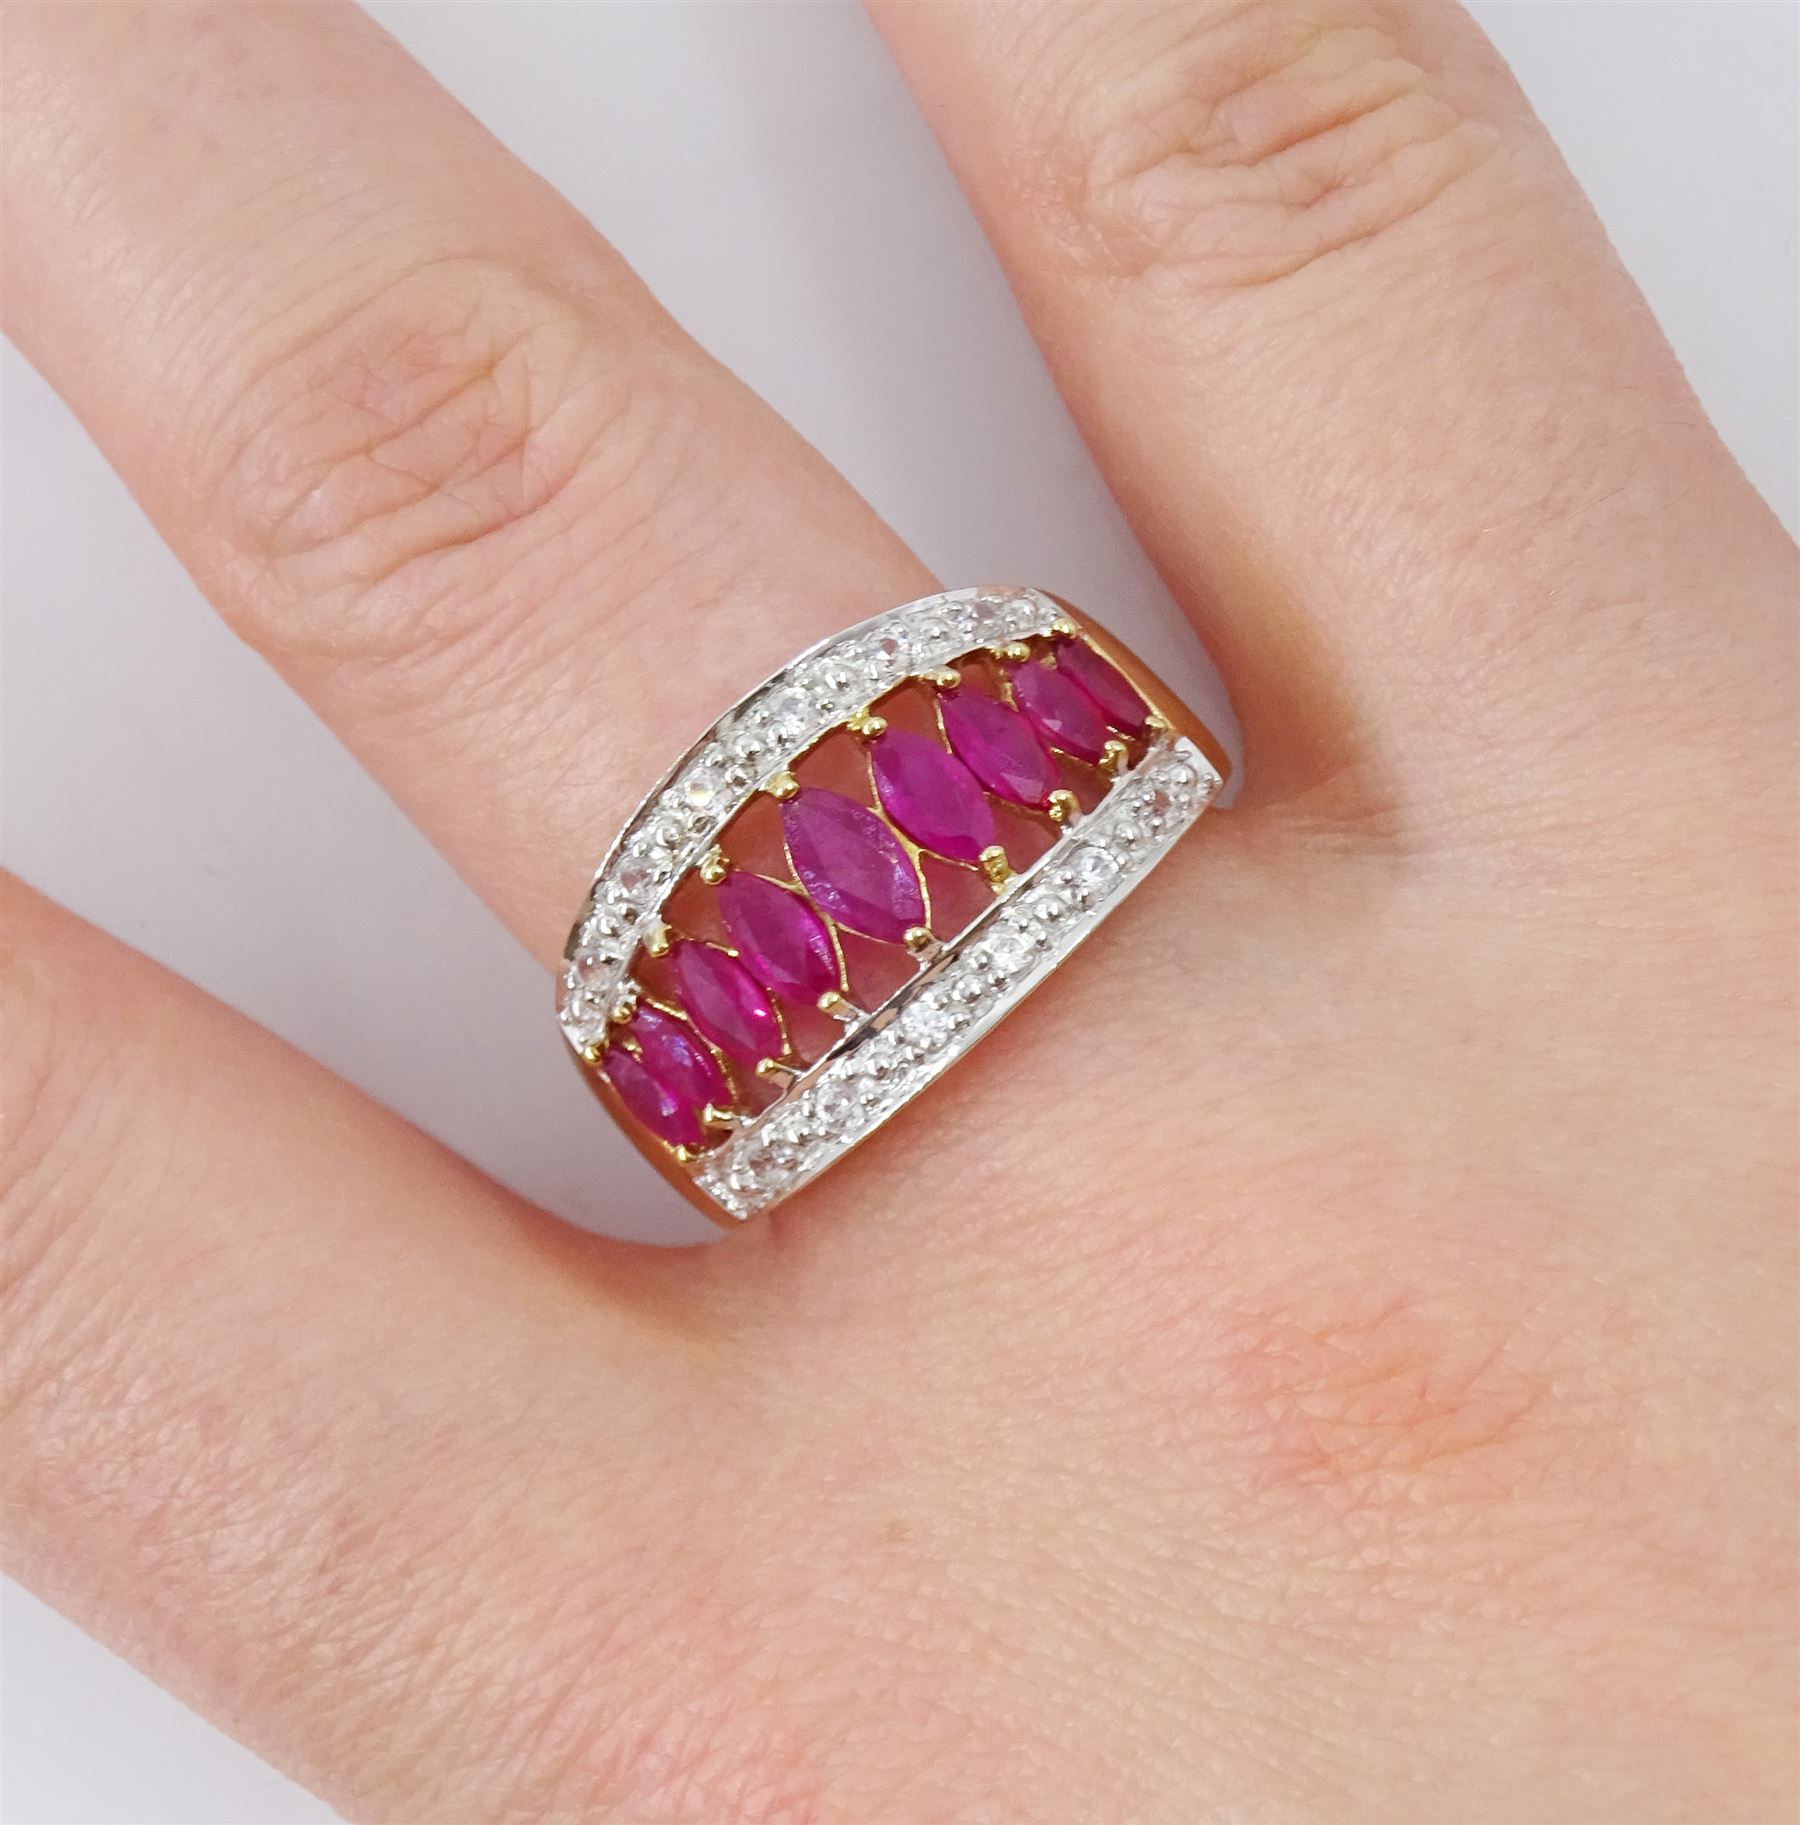 9ct gold marquise shaped ruby and diamond ring - Image 2 of 4